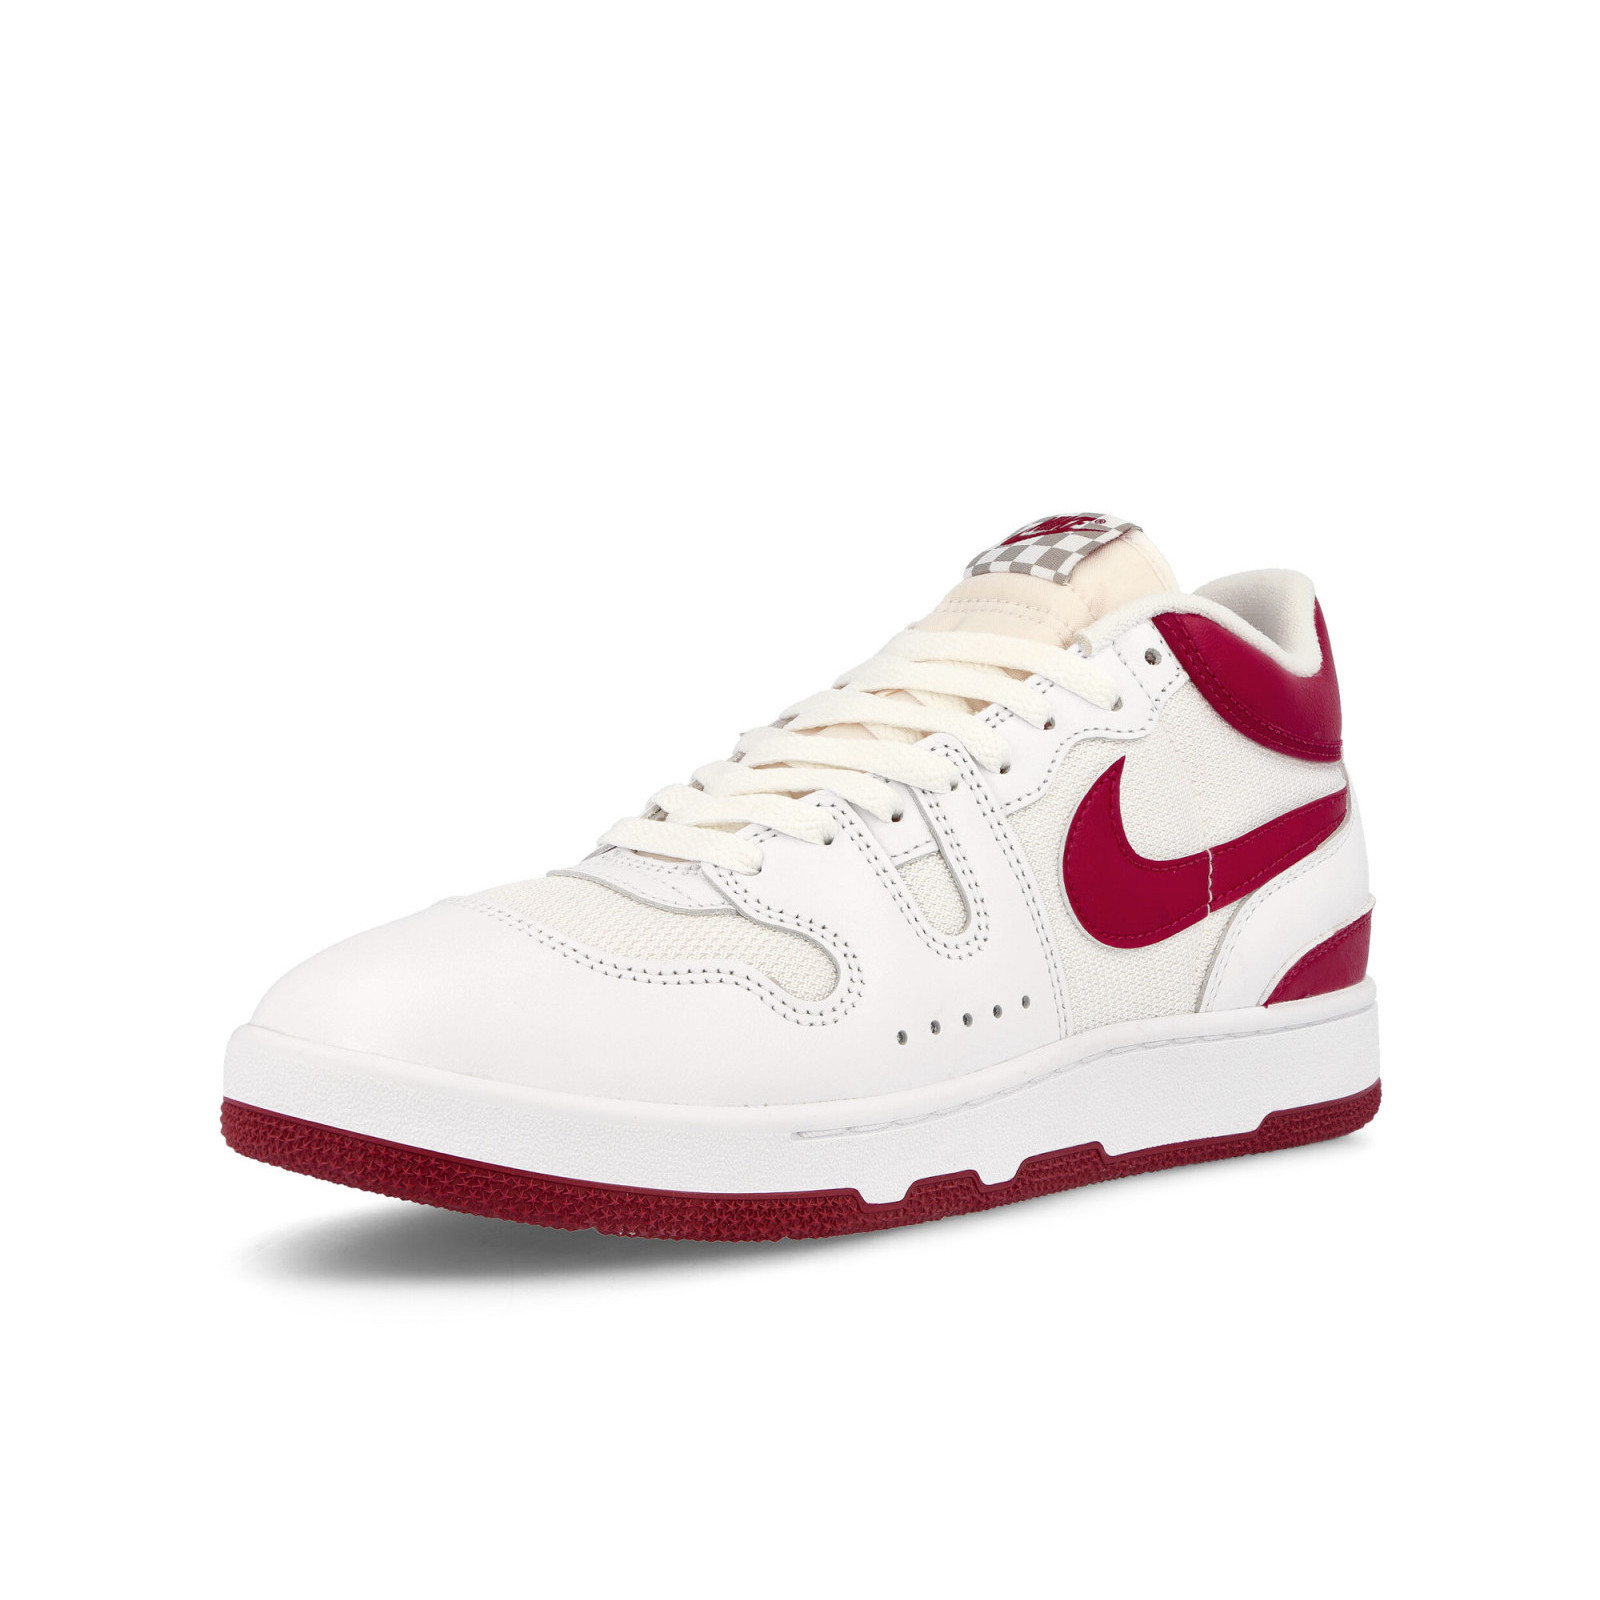 Nike Attack QS SP
« Red Crush »